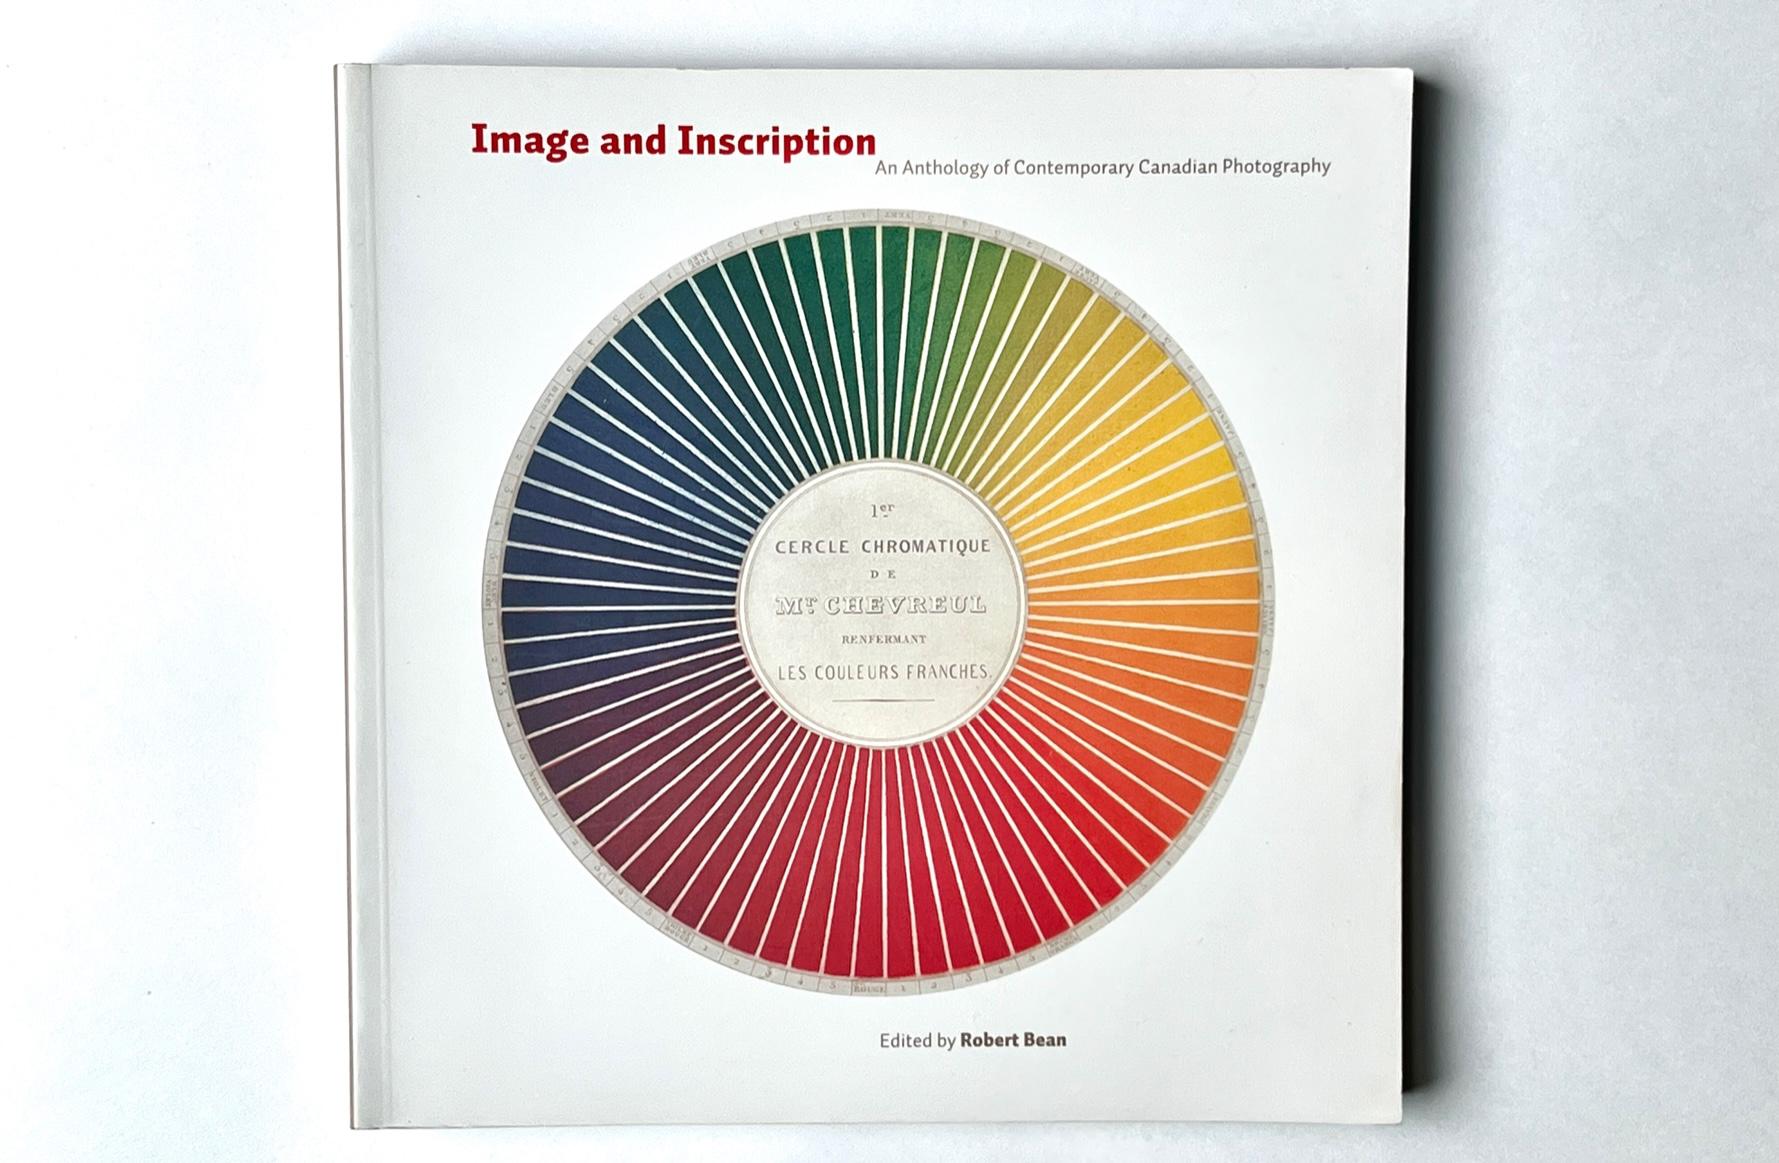 Image and Inscription: An Anthology of Contemporary Canadian Photography, Robert Bean, ed, Gallery 44 / YYZ Books, Toronto, 2005, 232 pp